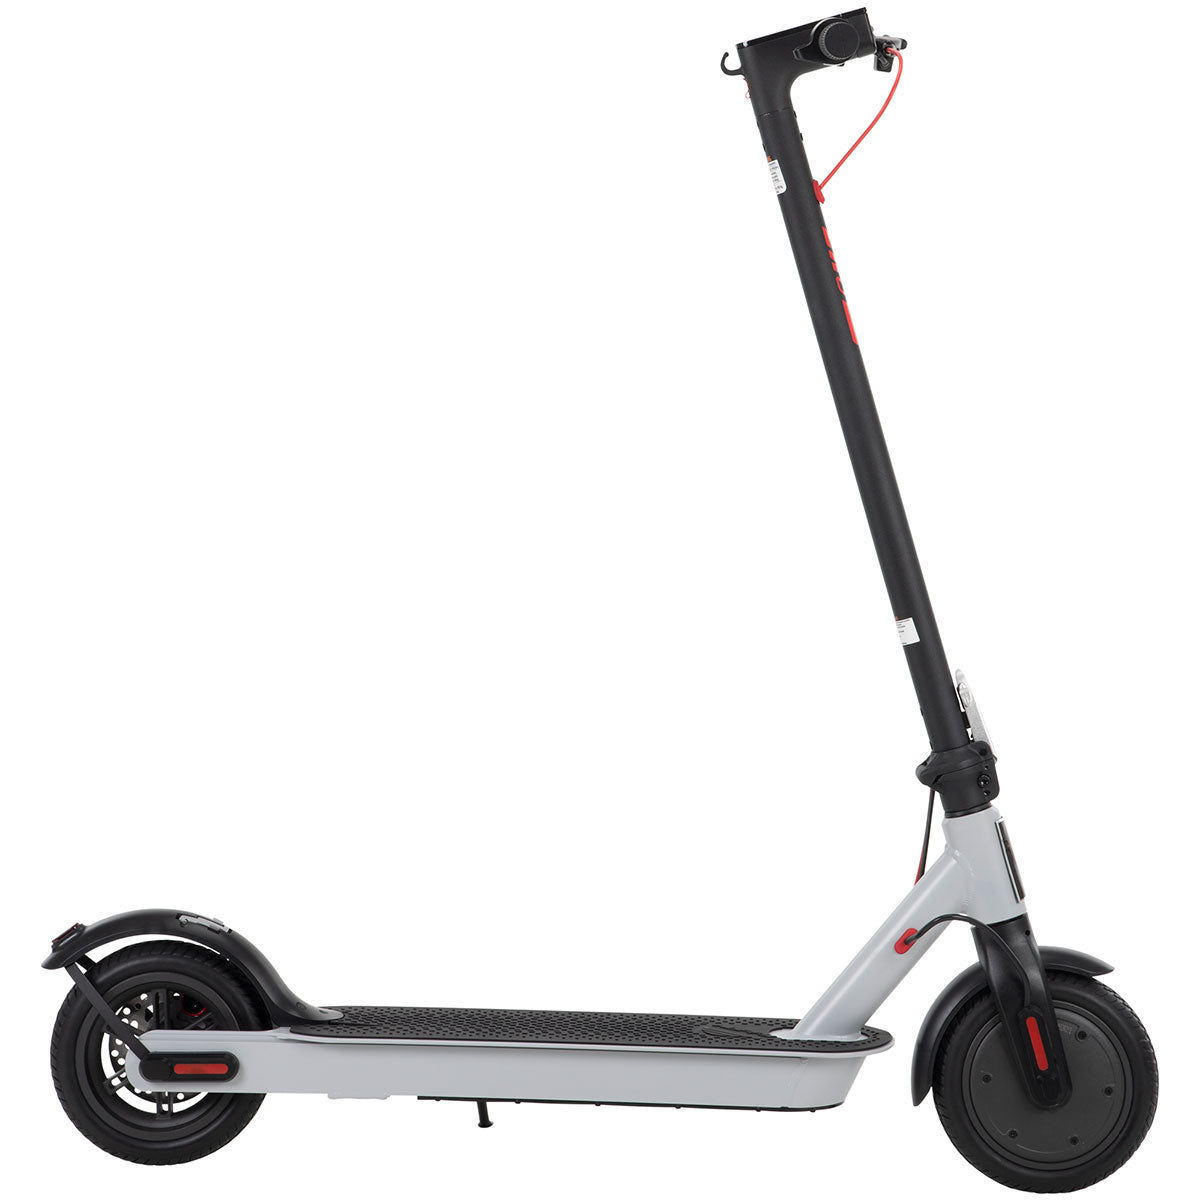 Scooter eléctrico Huffy ZX3 Lithium Color Gris Con Asiento Desmontable